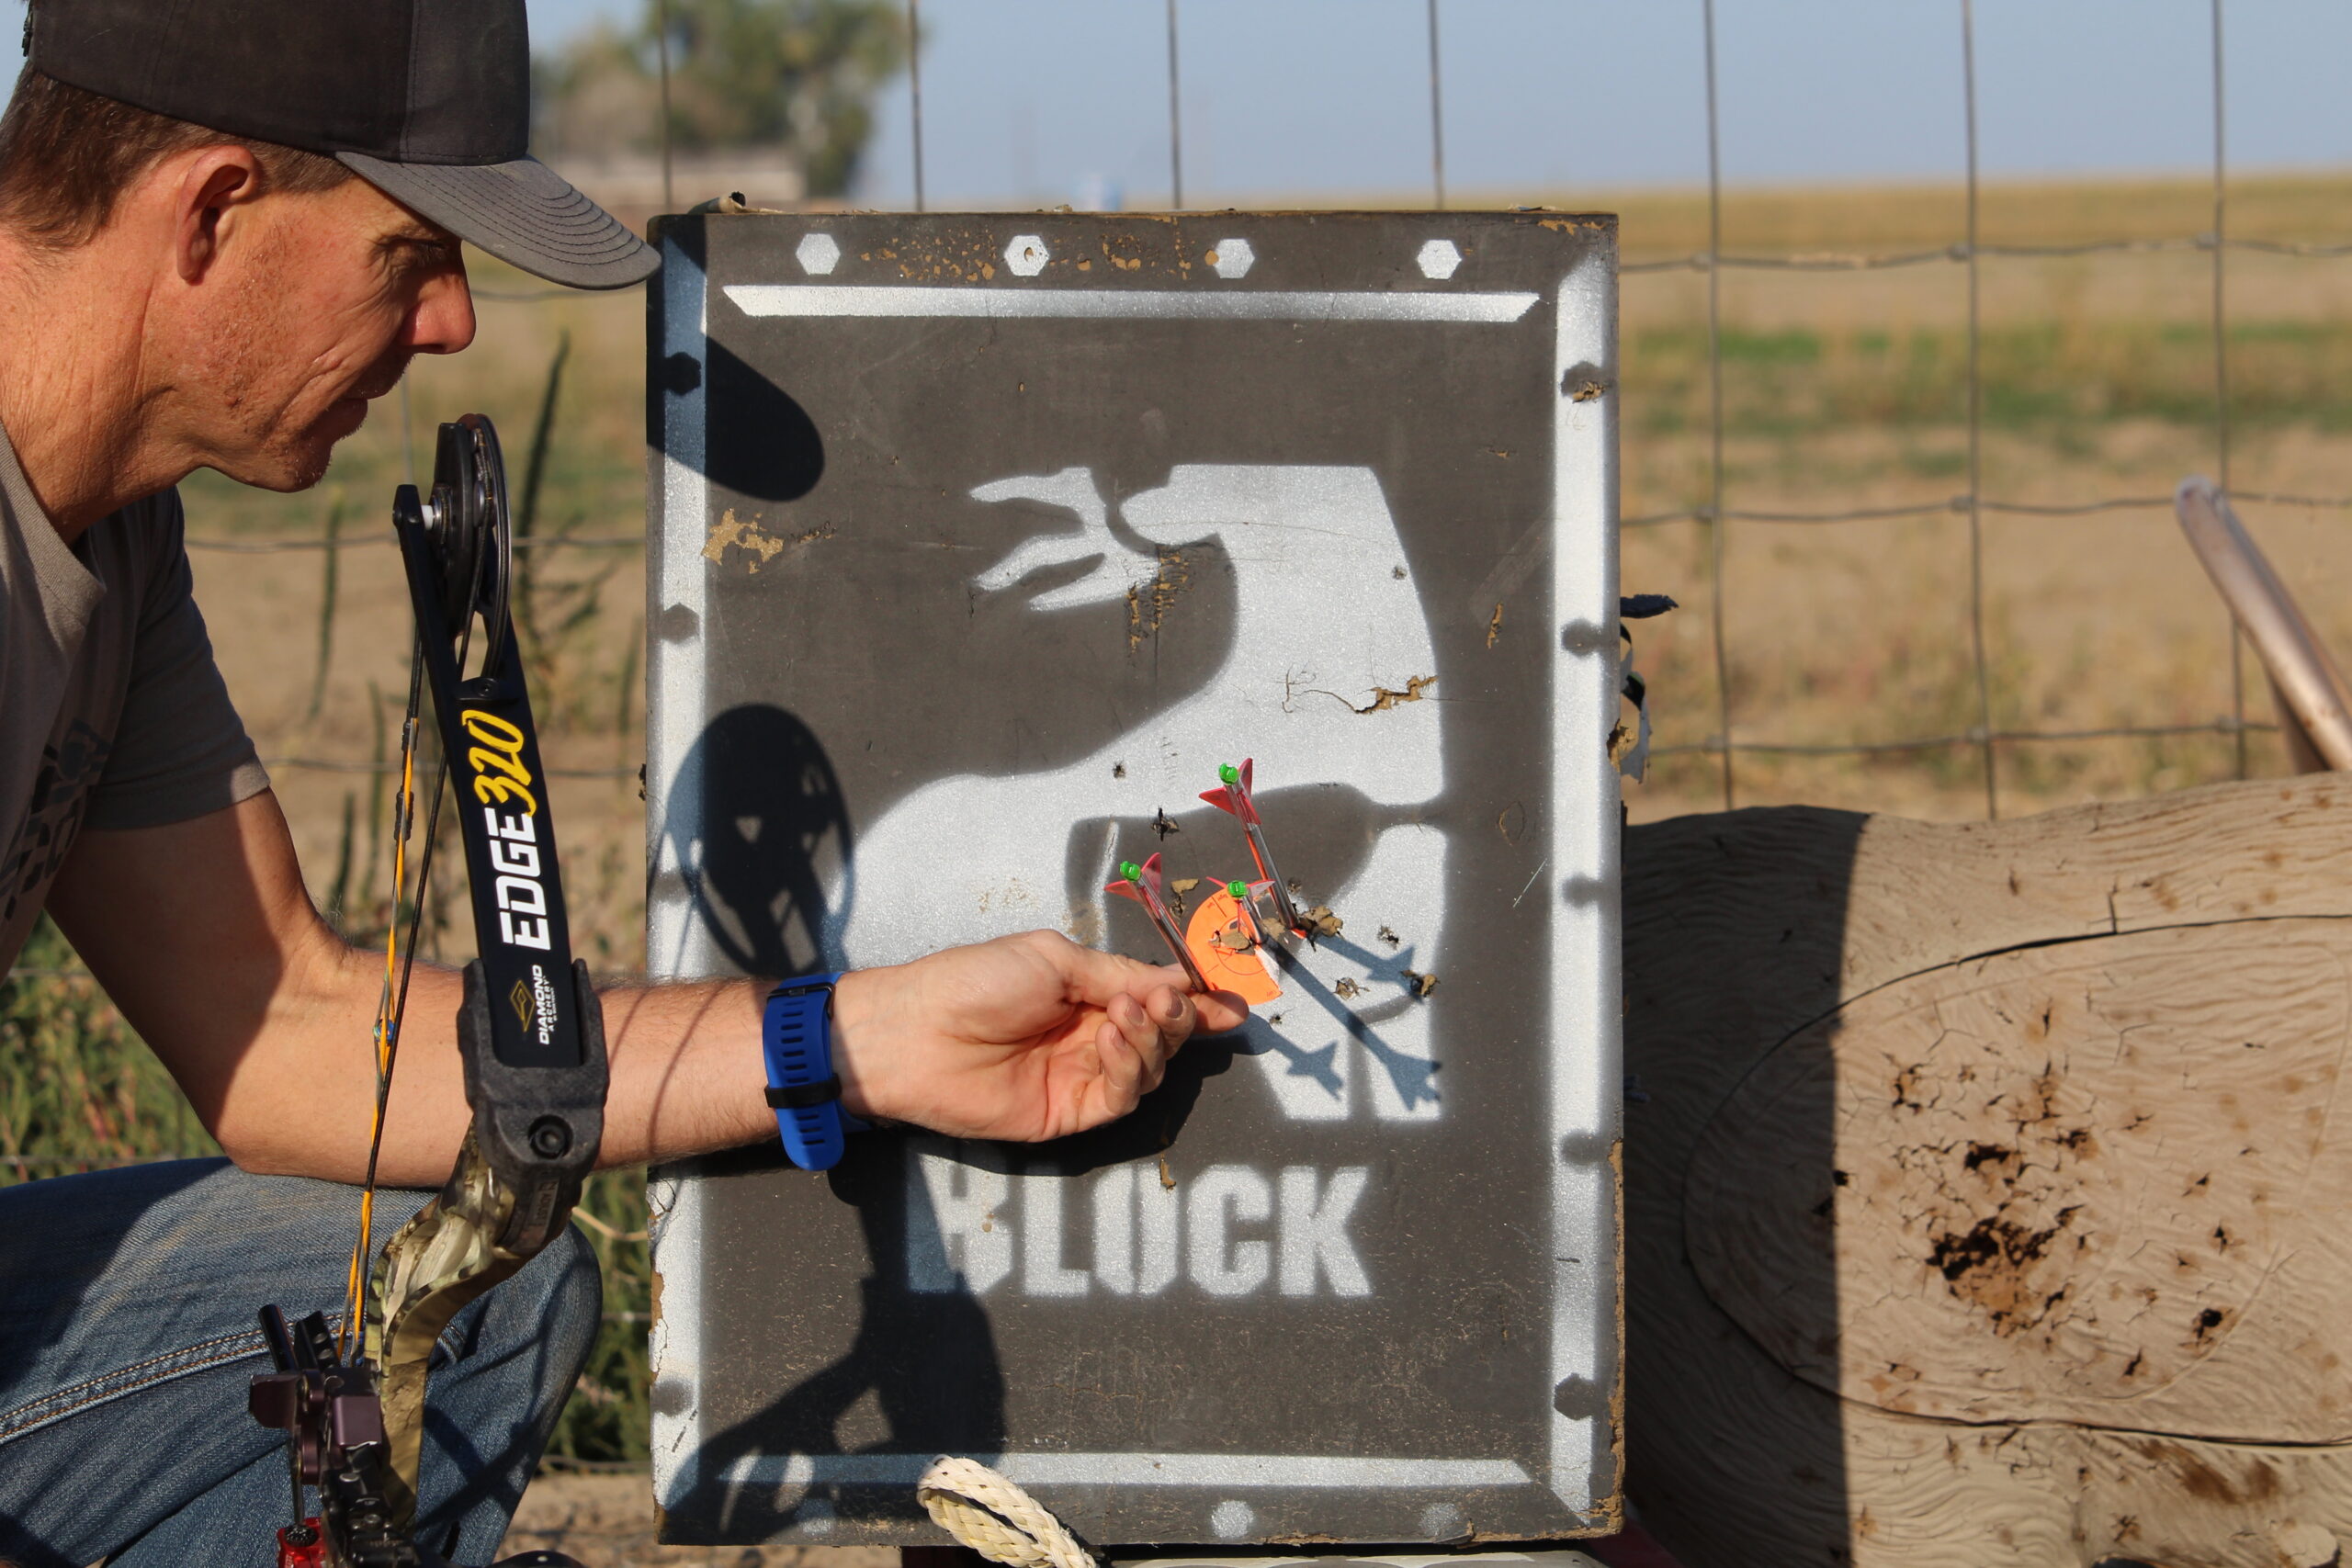 An archer examines arrow groups in a block target while holding a Diamond Edge 320 bow.